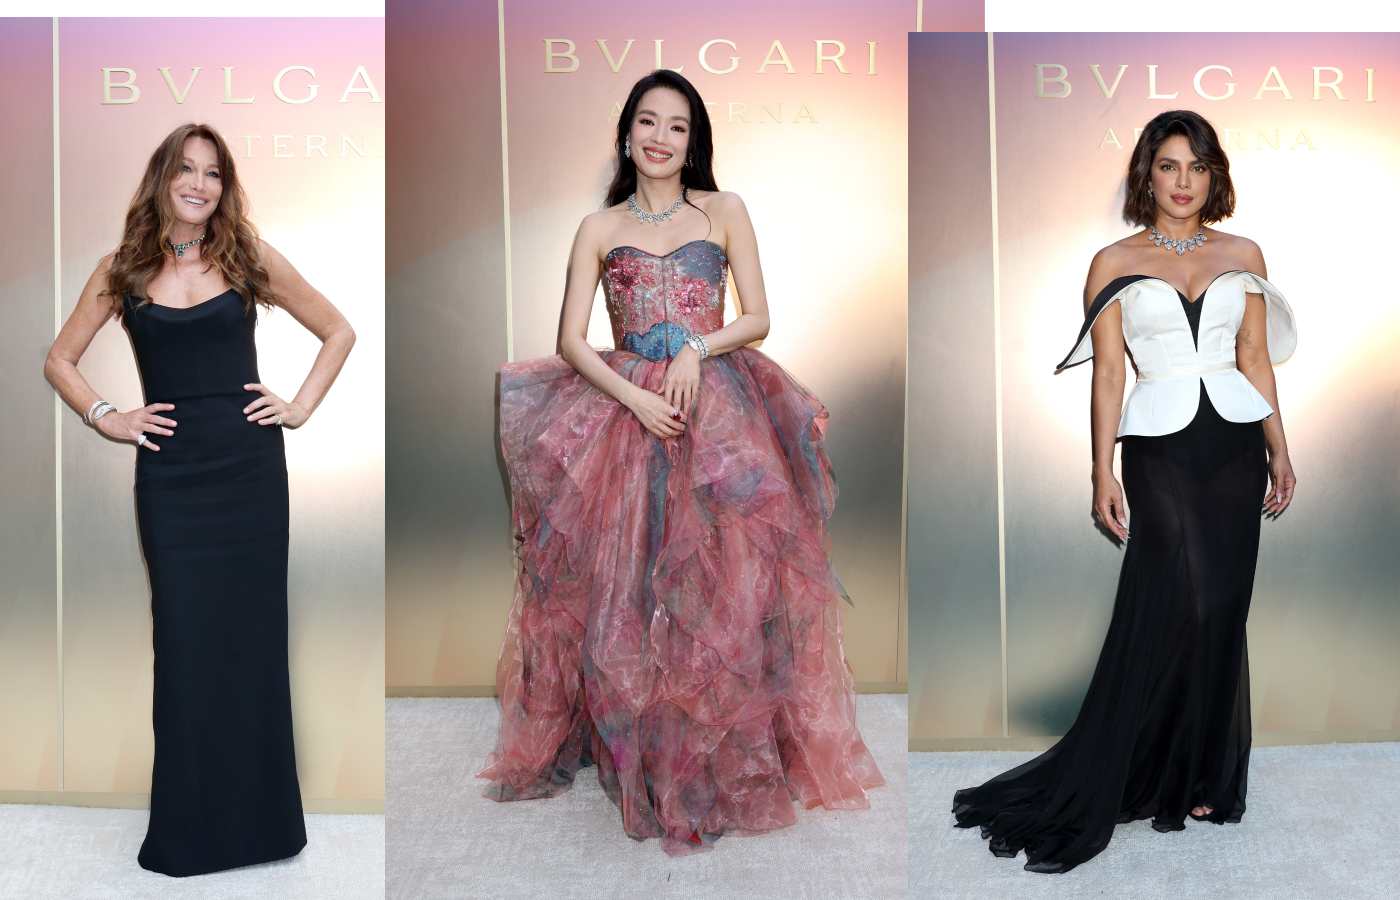 Celebrities attend the Bulgari Aeterna High Jewellery collection launch in Rome, including (from left to right) French model Carla Bruni, Taiwanese actress Shu Qi, and Indian actress Priyanka Chopra